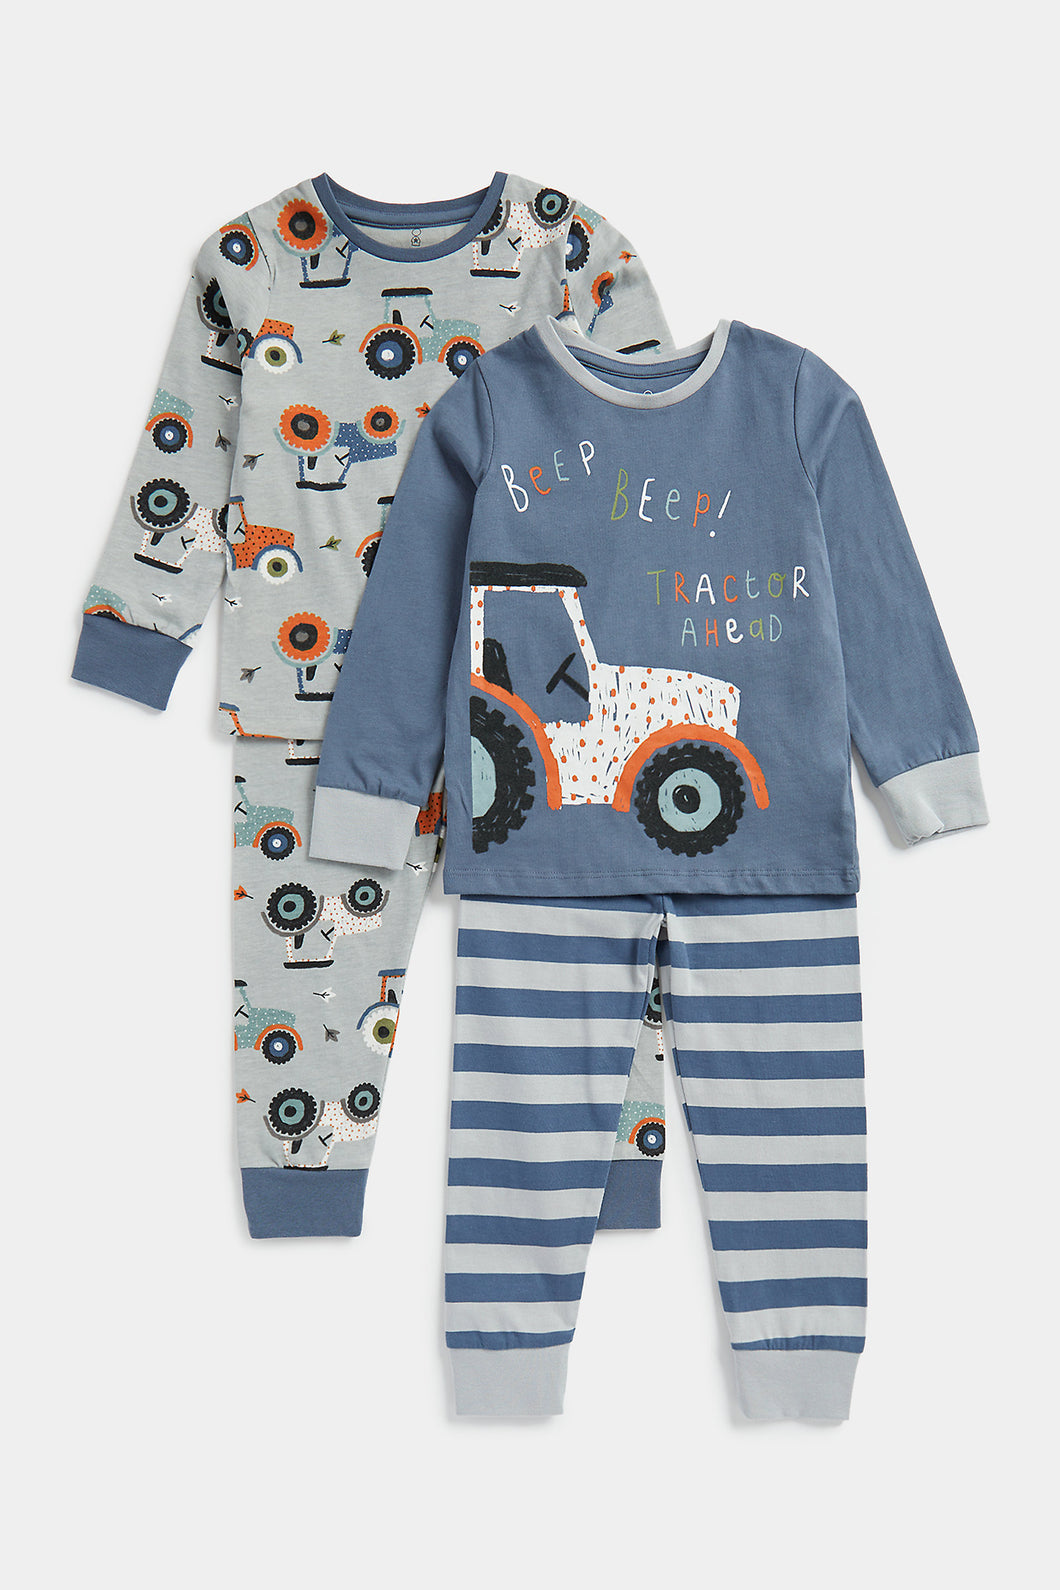 Mothercare Tractor Pyjamas - 2 Pack